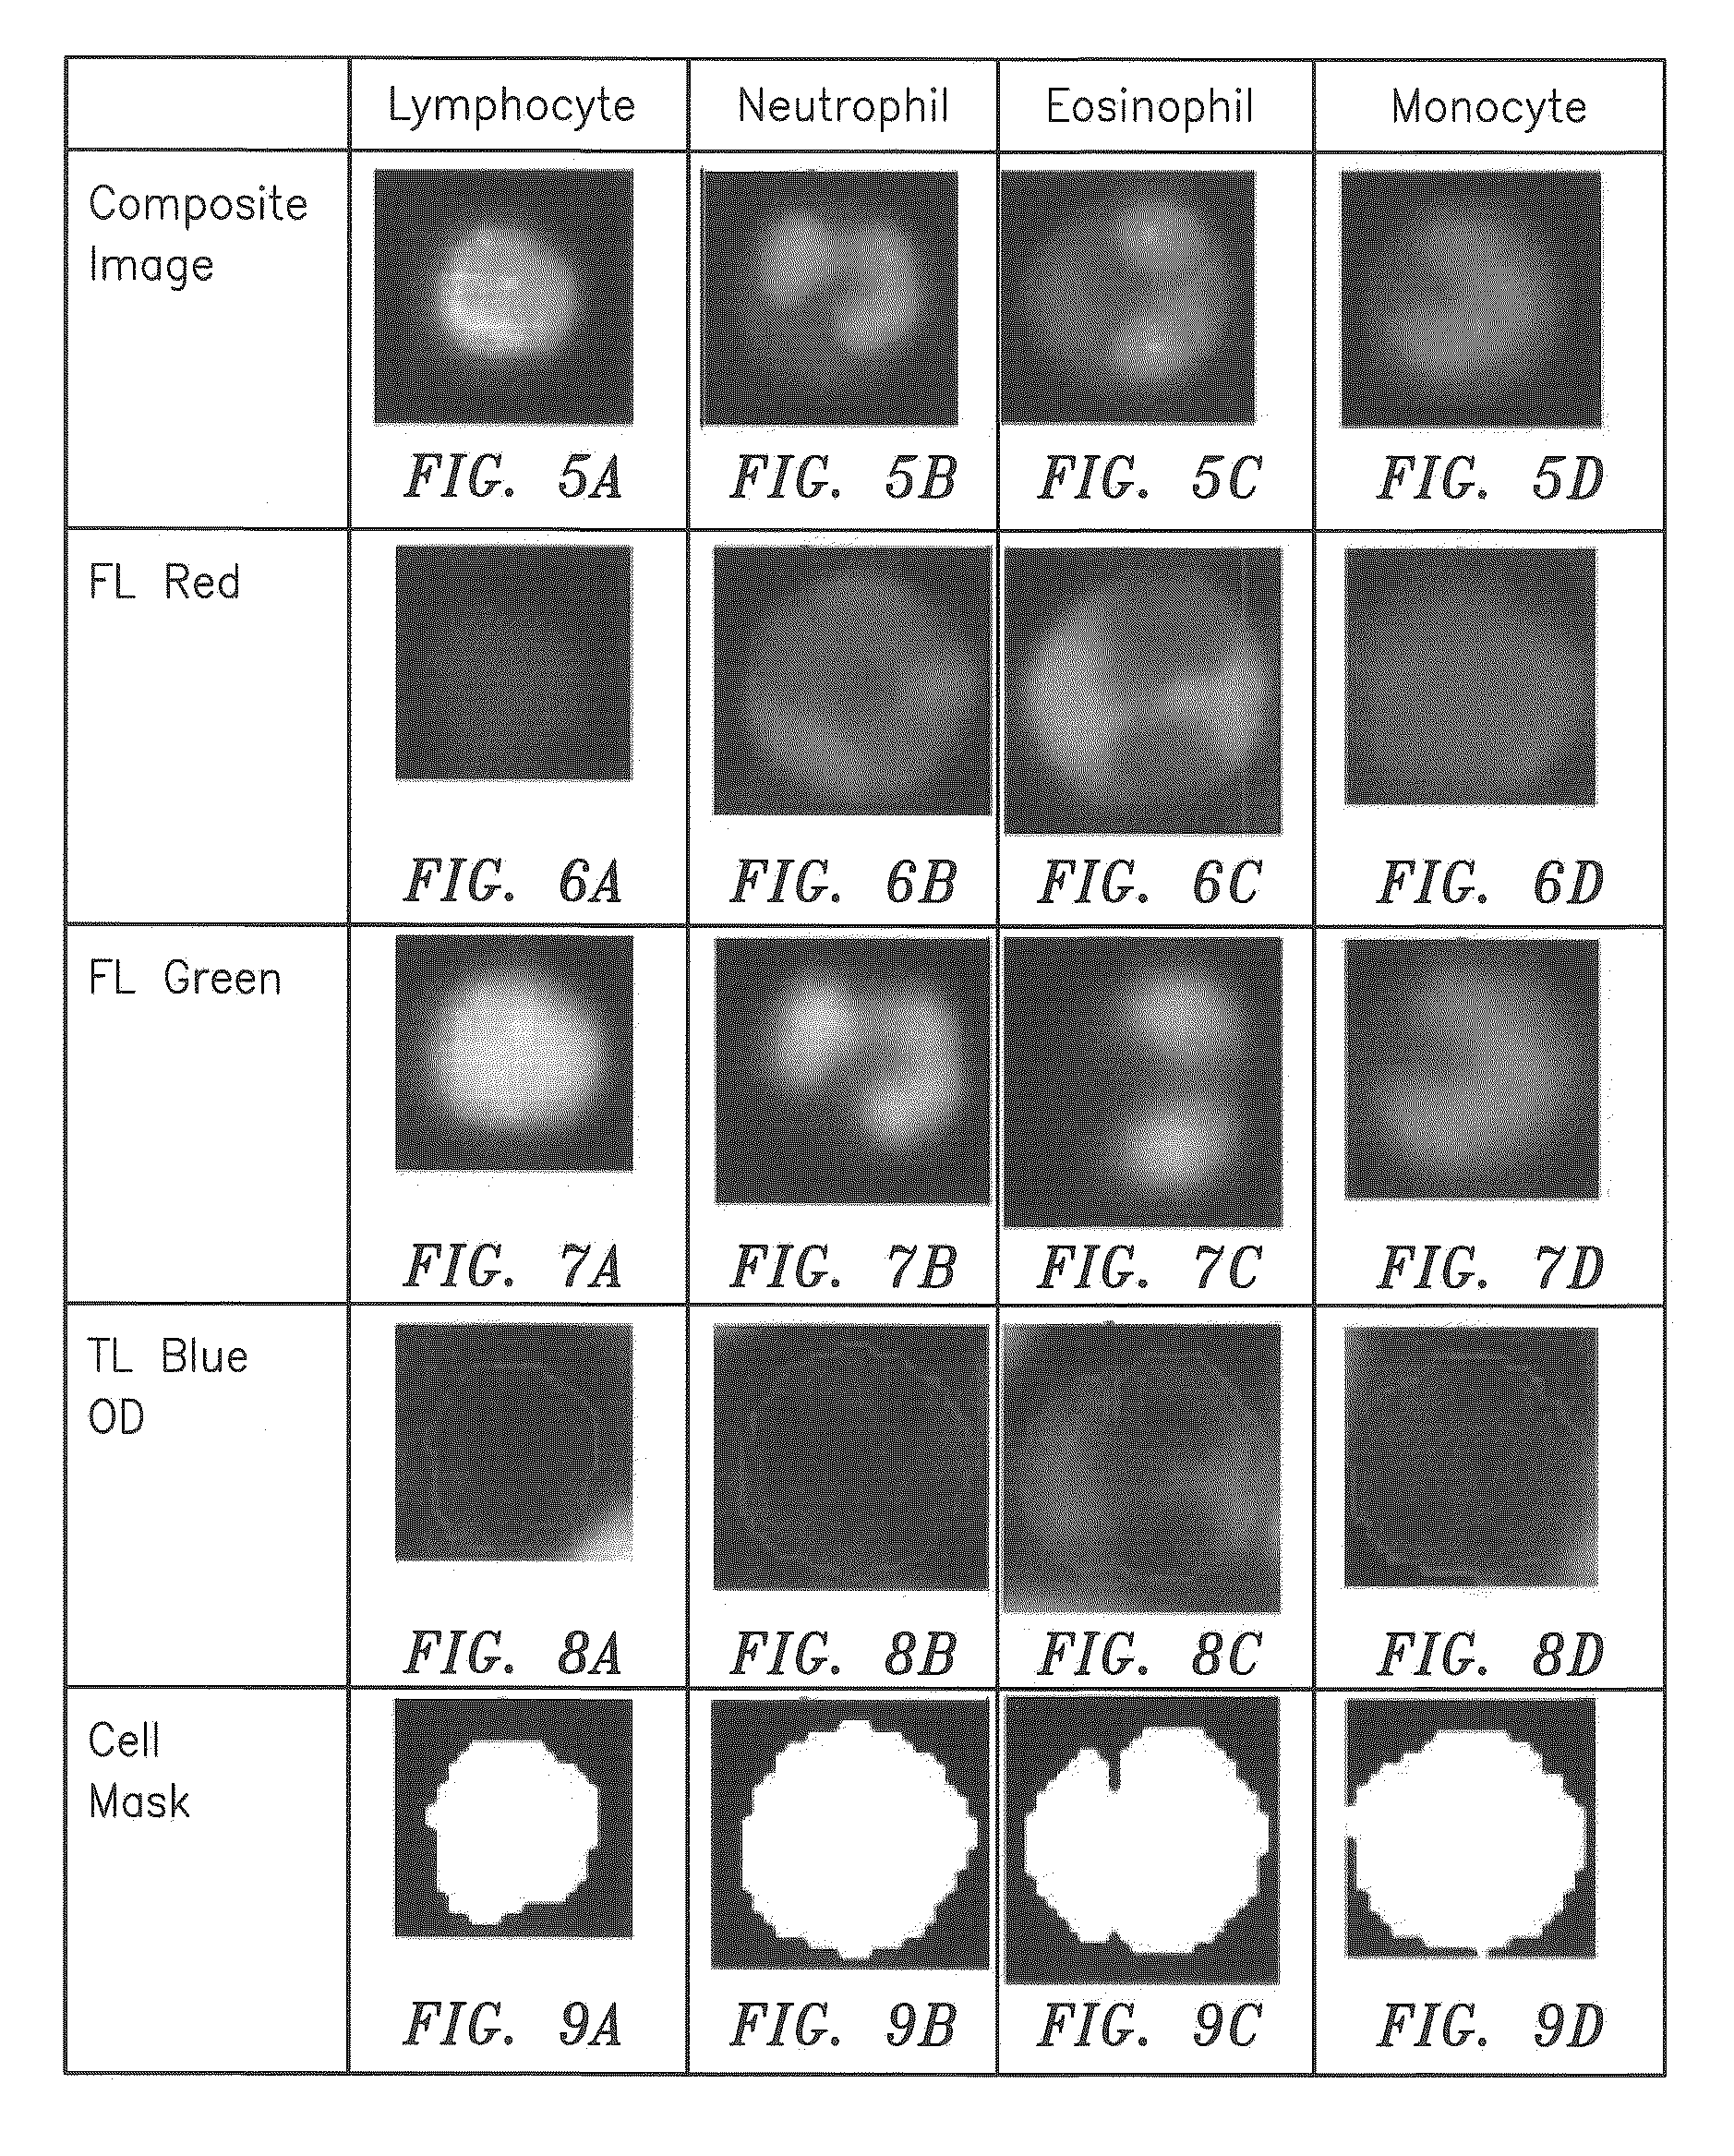 Method and apparatus for automated whole blood sample analyses from microscopy images